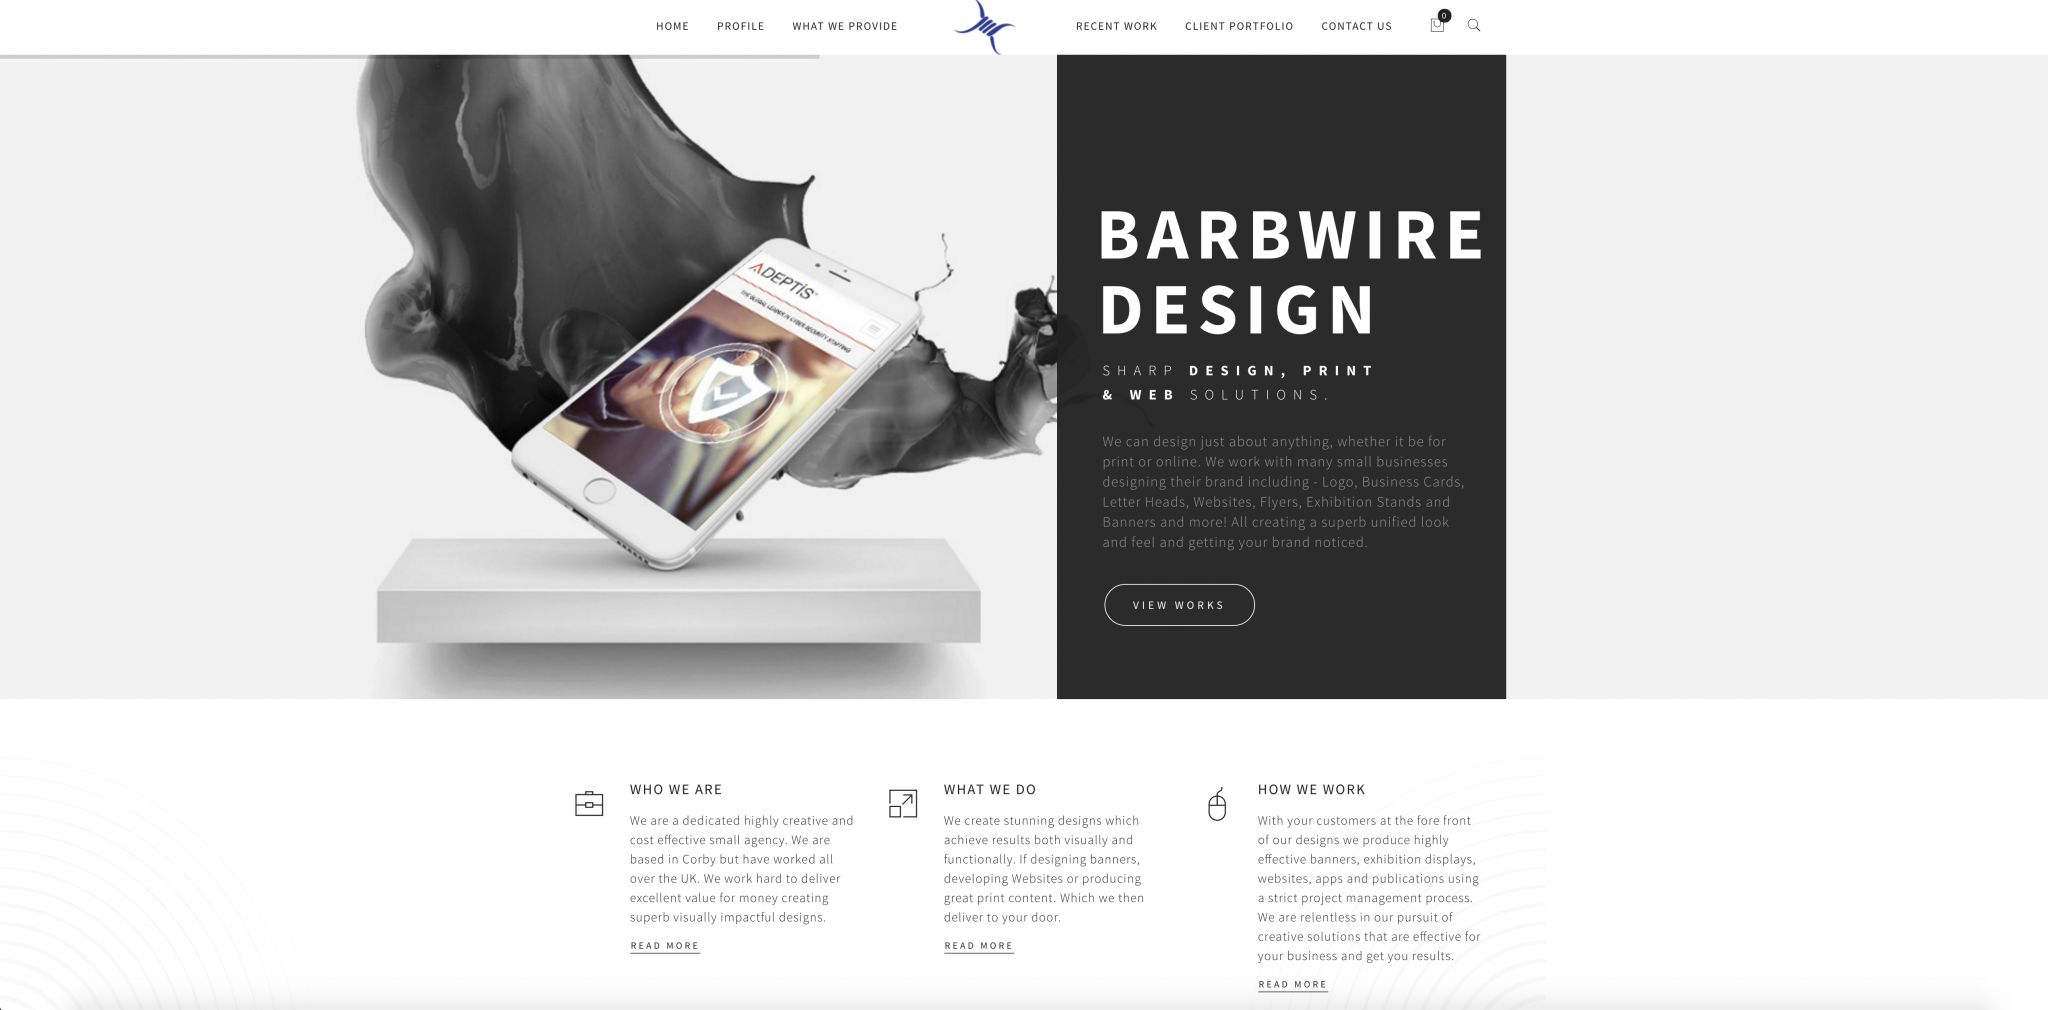 Barbwire Design Homepage Above The Fold